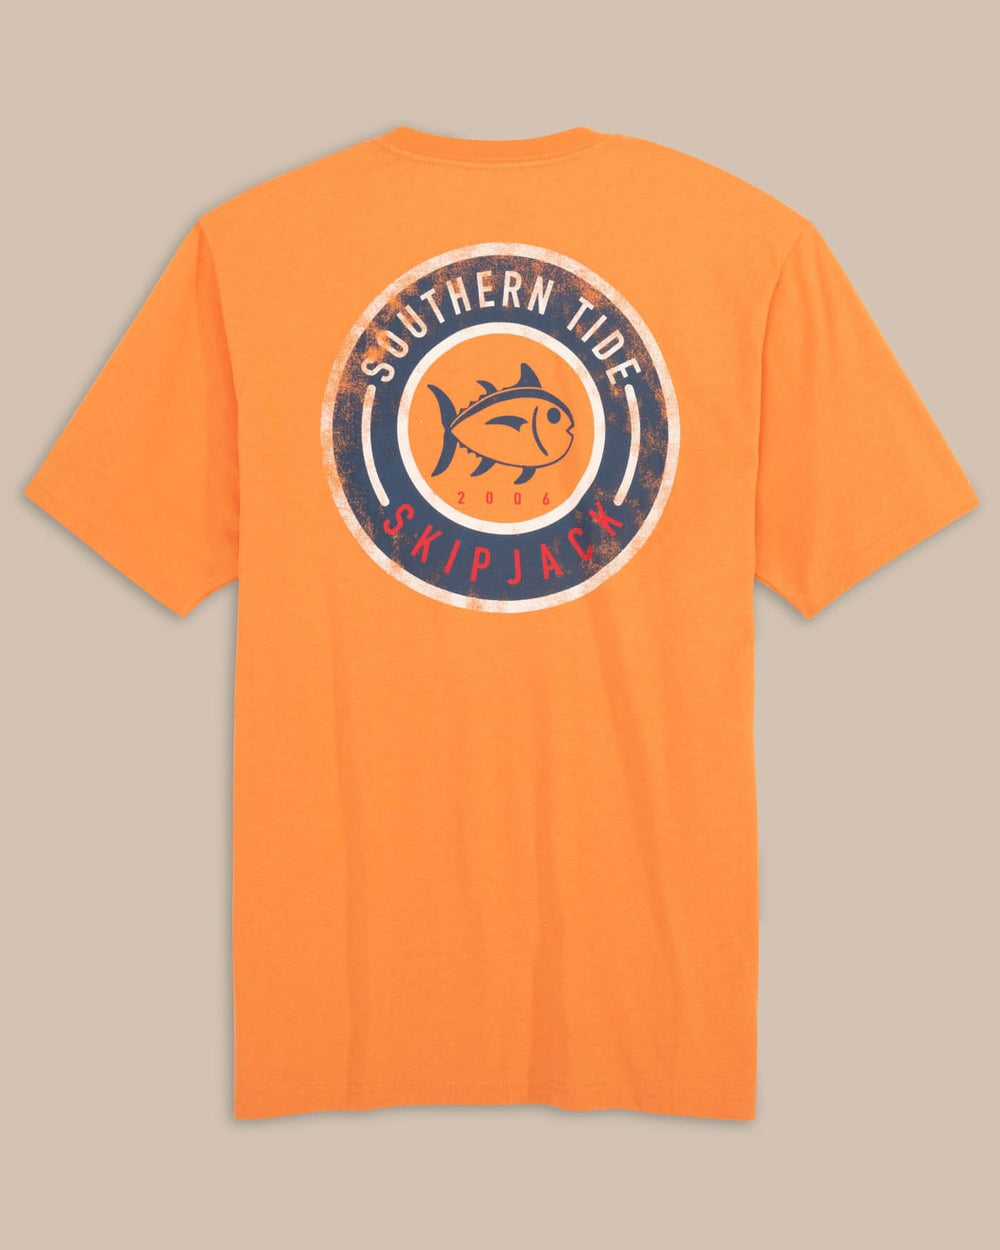 The back view of the Southern Tide ST Circle Short Sleeve T-Shirt by Southern Tide - Tangerine Orange